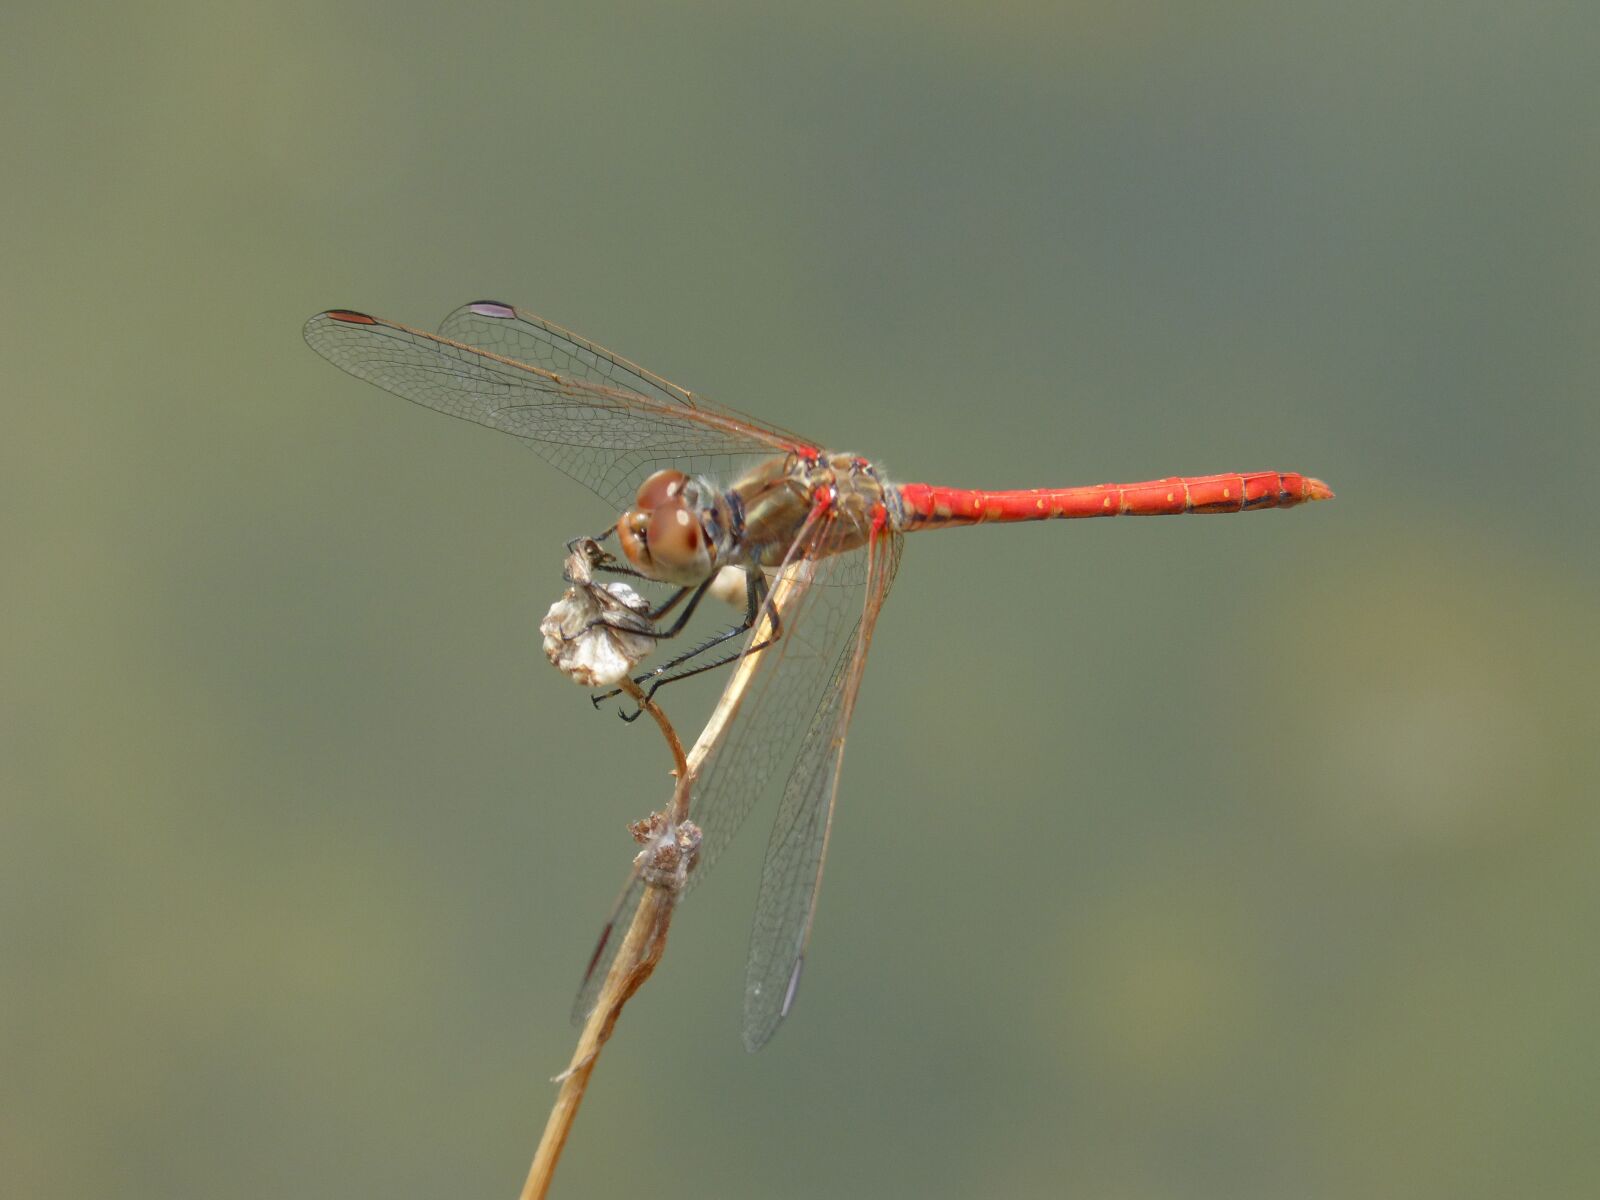 Panasonic DMC-FZ62 sample photo. Dragonfly, red dragonfly, insects photography